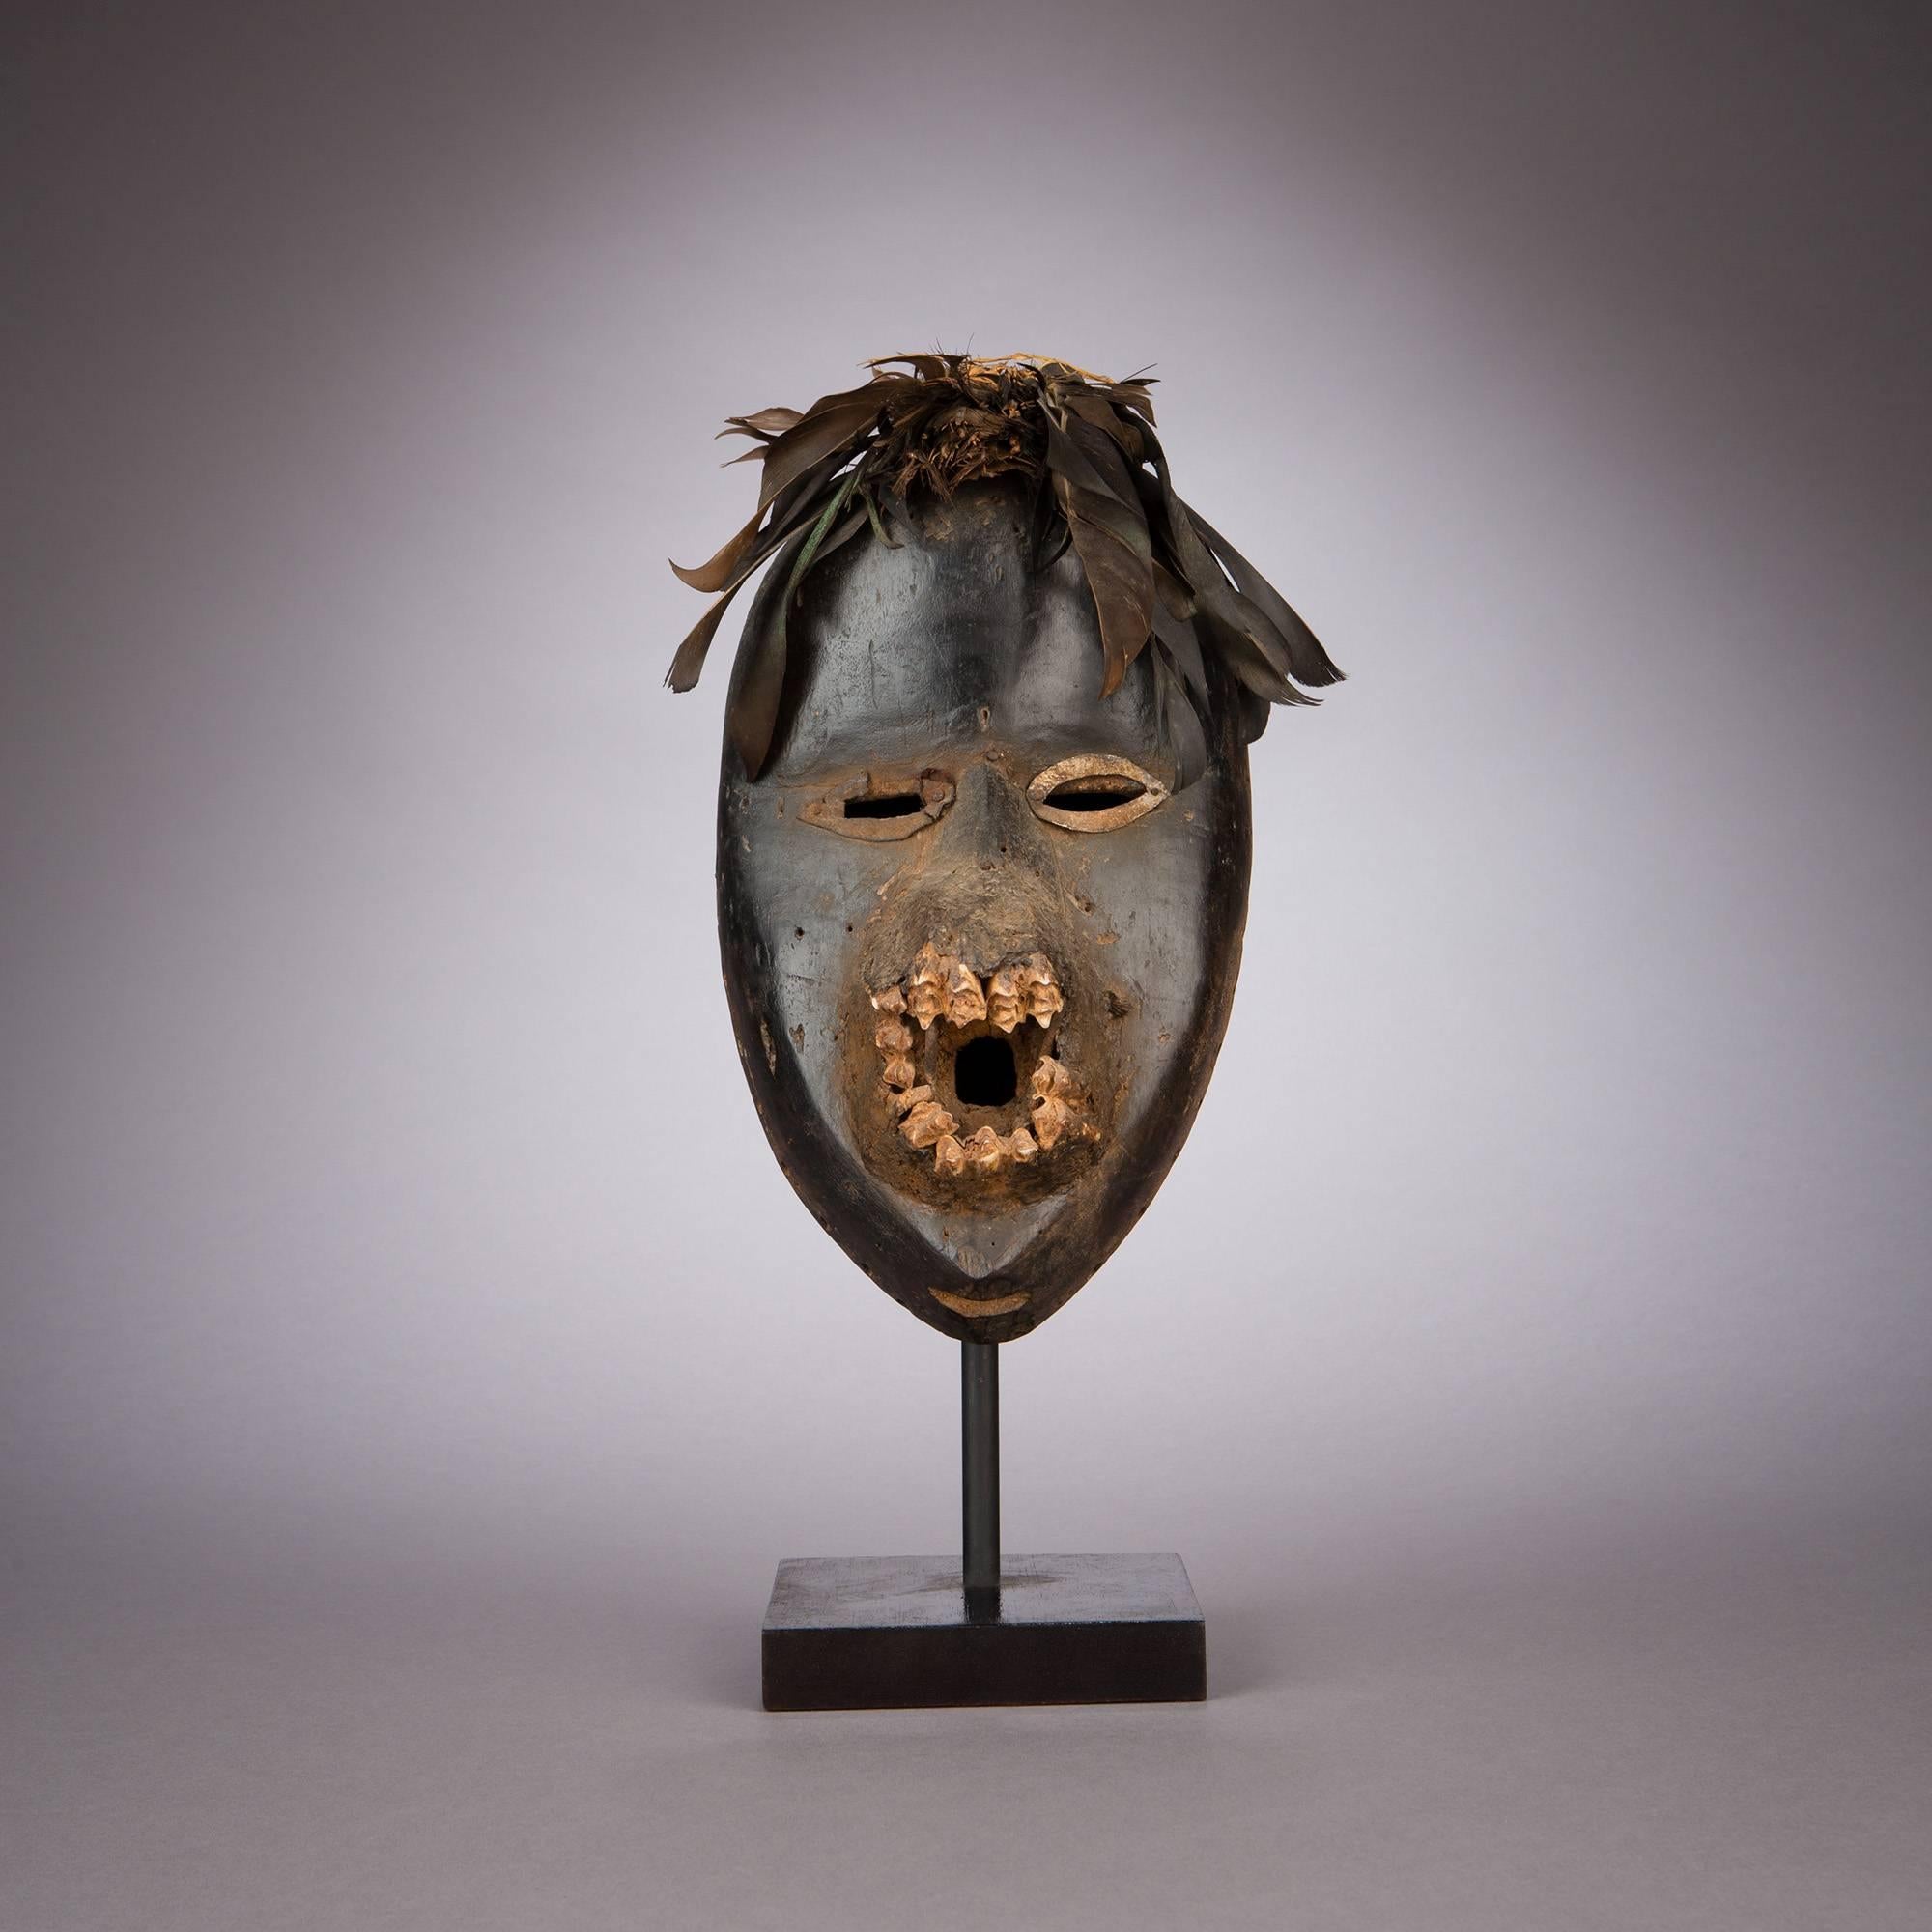 A Dan mask of unusual construction and amazing aesthetic power. Aged metal fitted around the eyes and the rough, earthen treatment around the jagged mouth contrast dramatically with the mask's smooth, lustrous forehead and cheeks. Dark feathers and